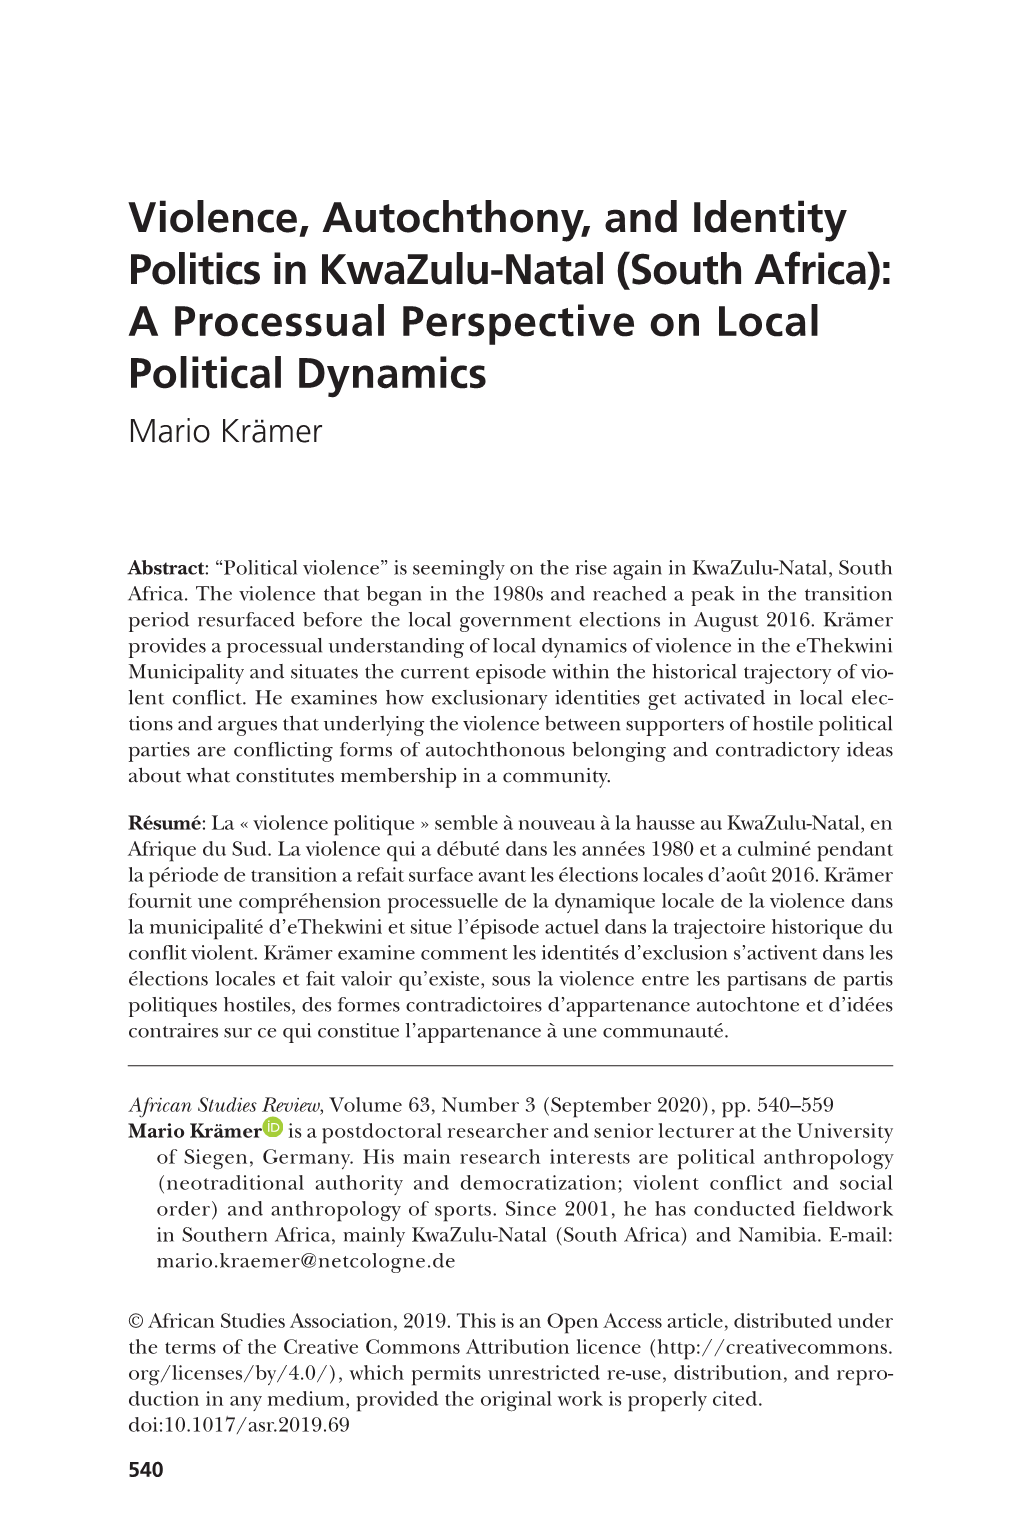 Violence, Autochthony, and Identity Politics in Kwazulu-Natal (South Africa): a Processual Perspective on Local Political Dynamics Mario Krämer